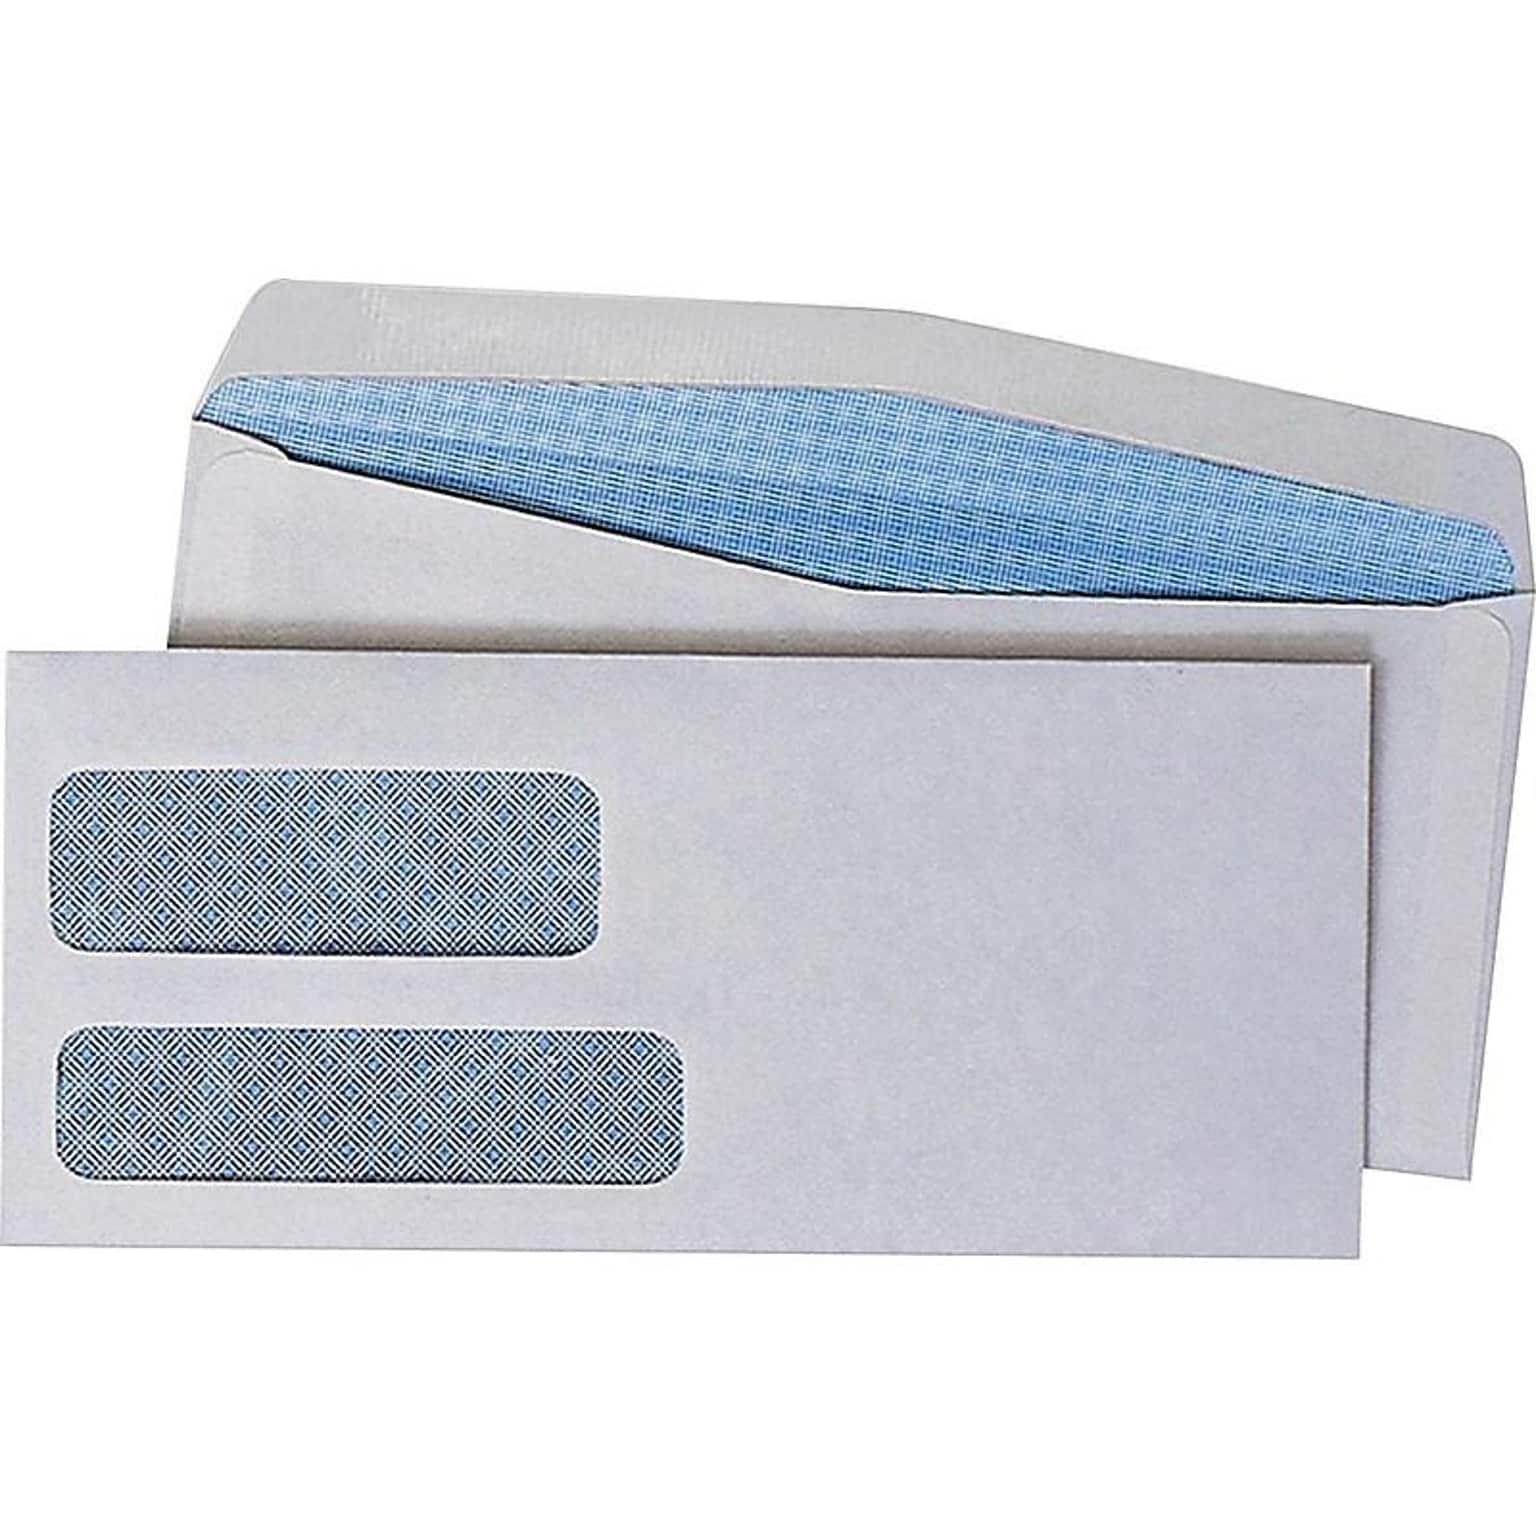 Quality Park Gummed Security Tinted #10 Double Window Envelopes, 4 1/8 x 9 1/2, White, 500/Box (24550)